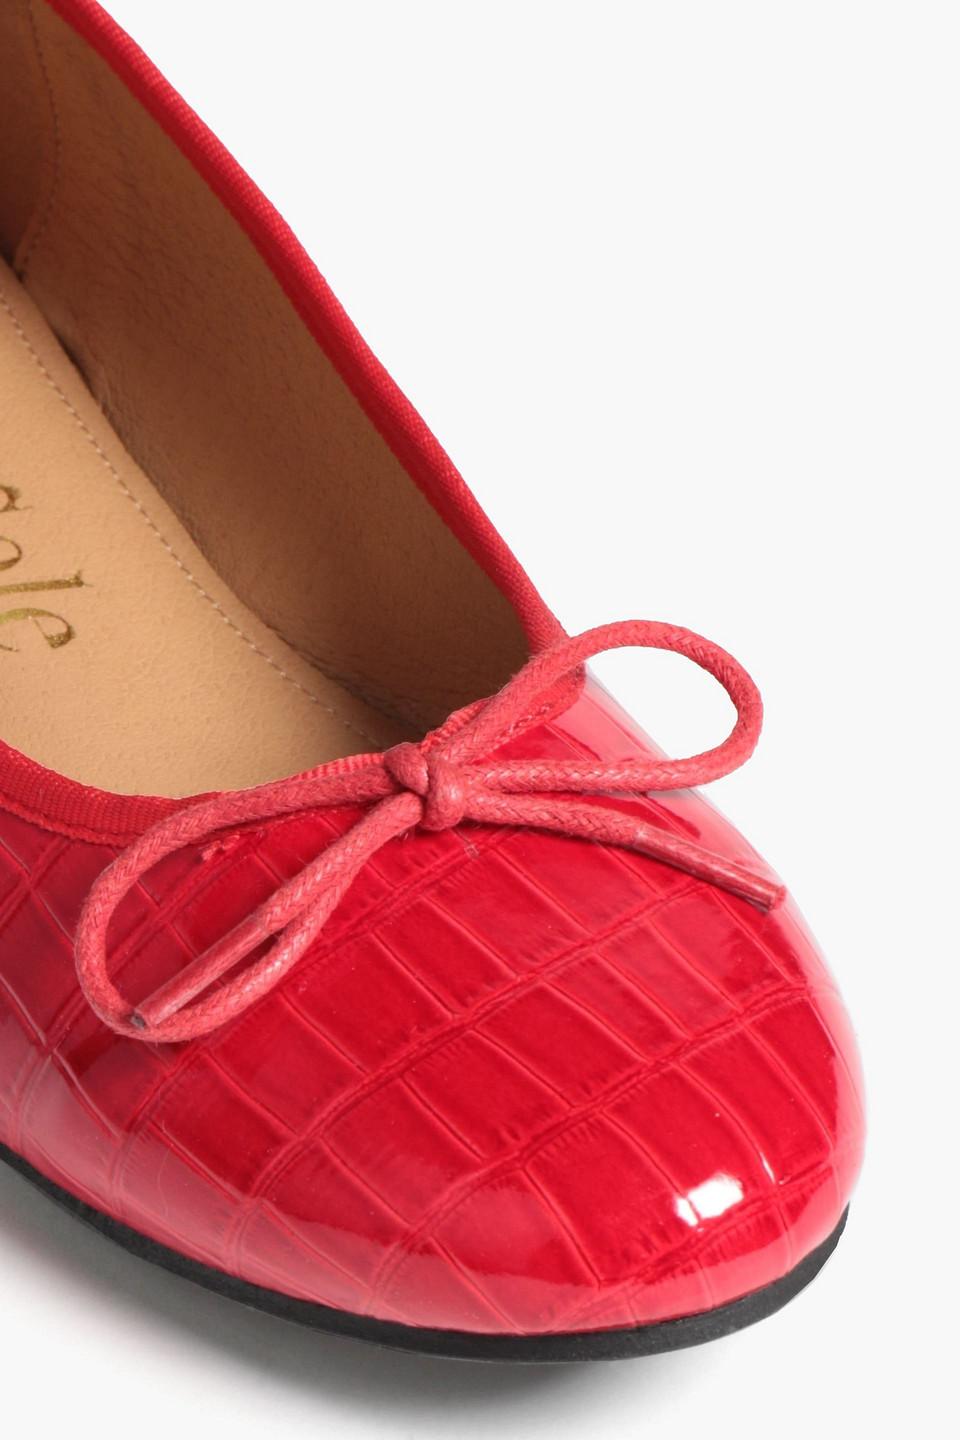 French Sole Amelie Croc-effect Patent-leather Ballet Flats in Red | Lyst